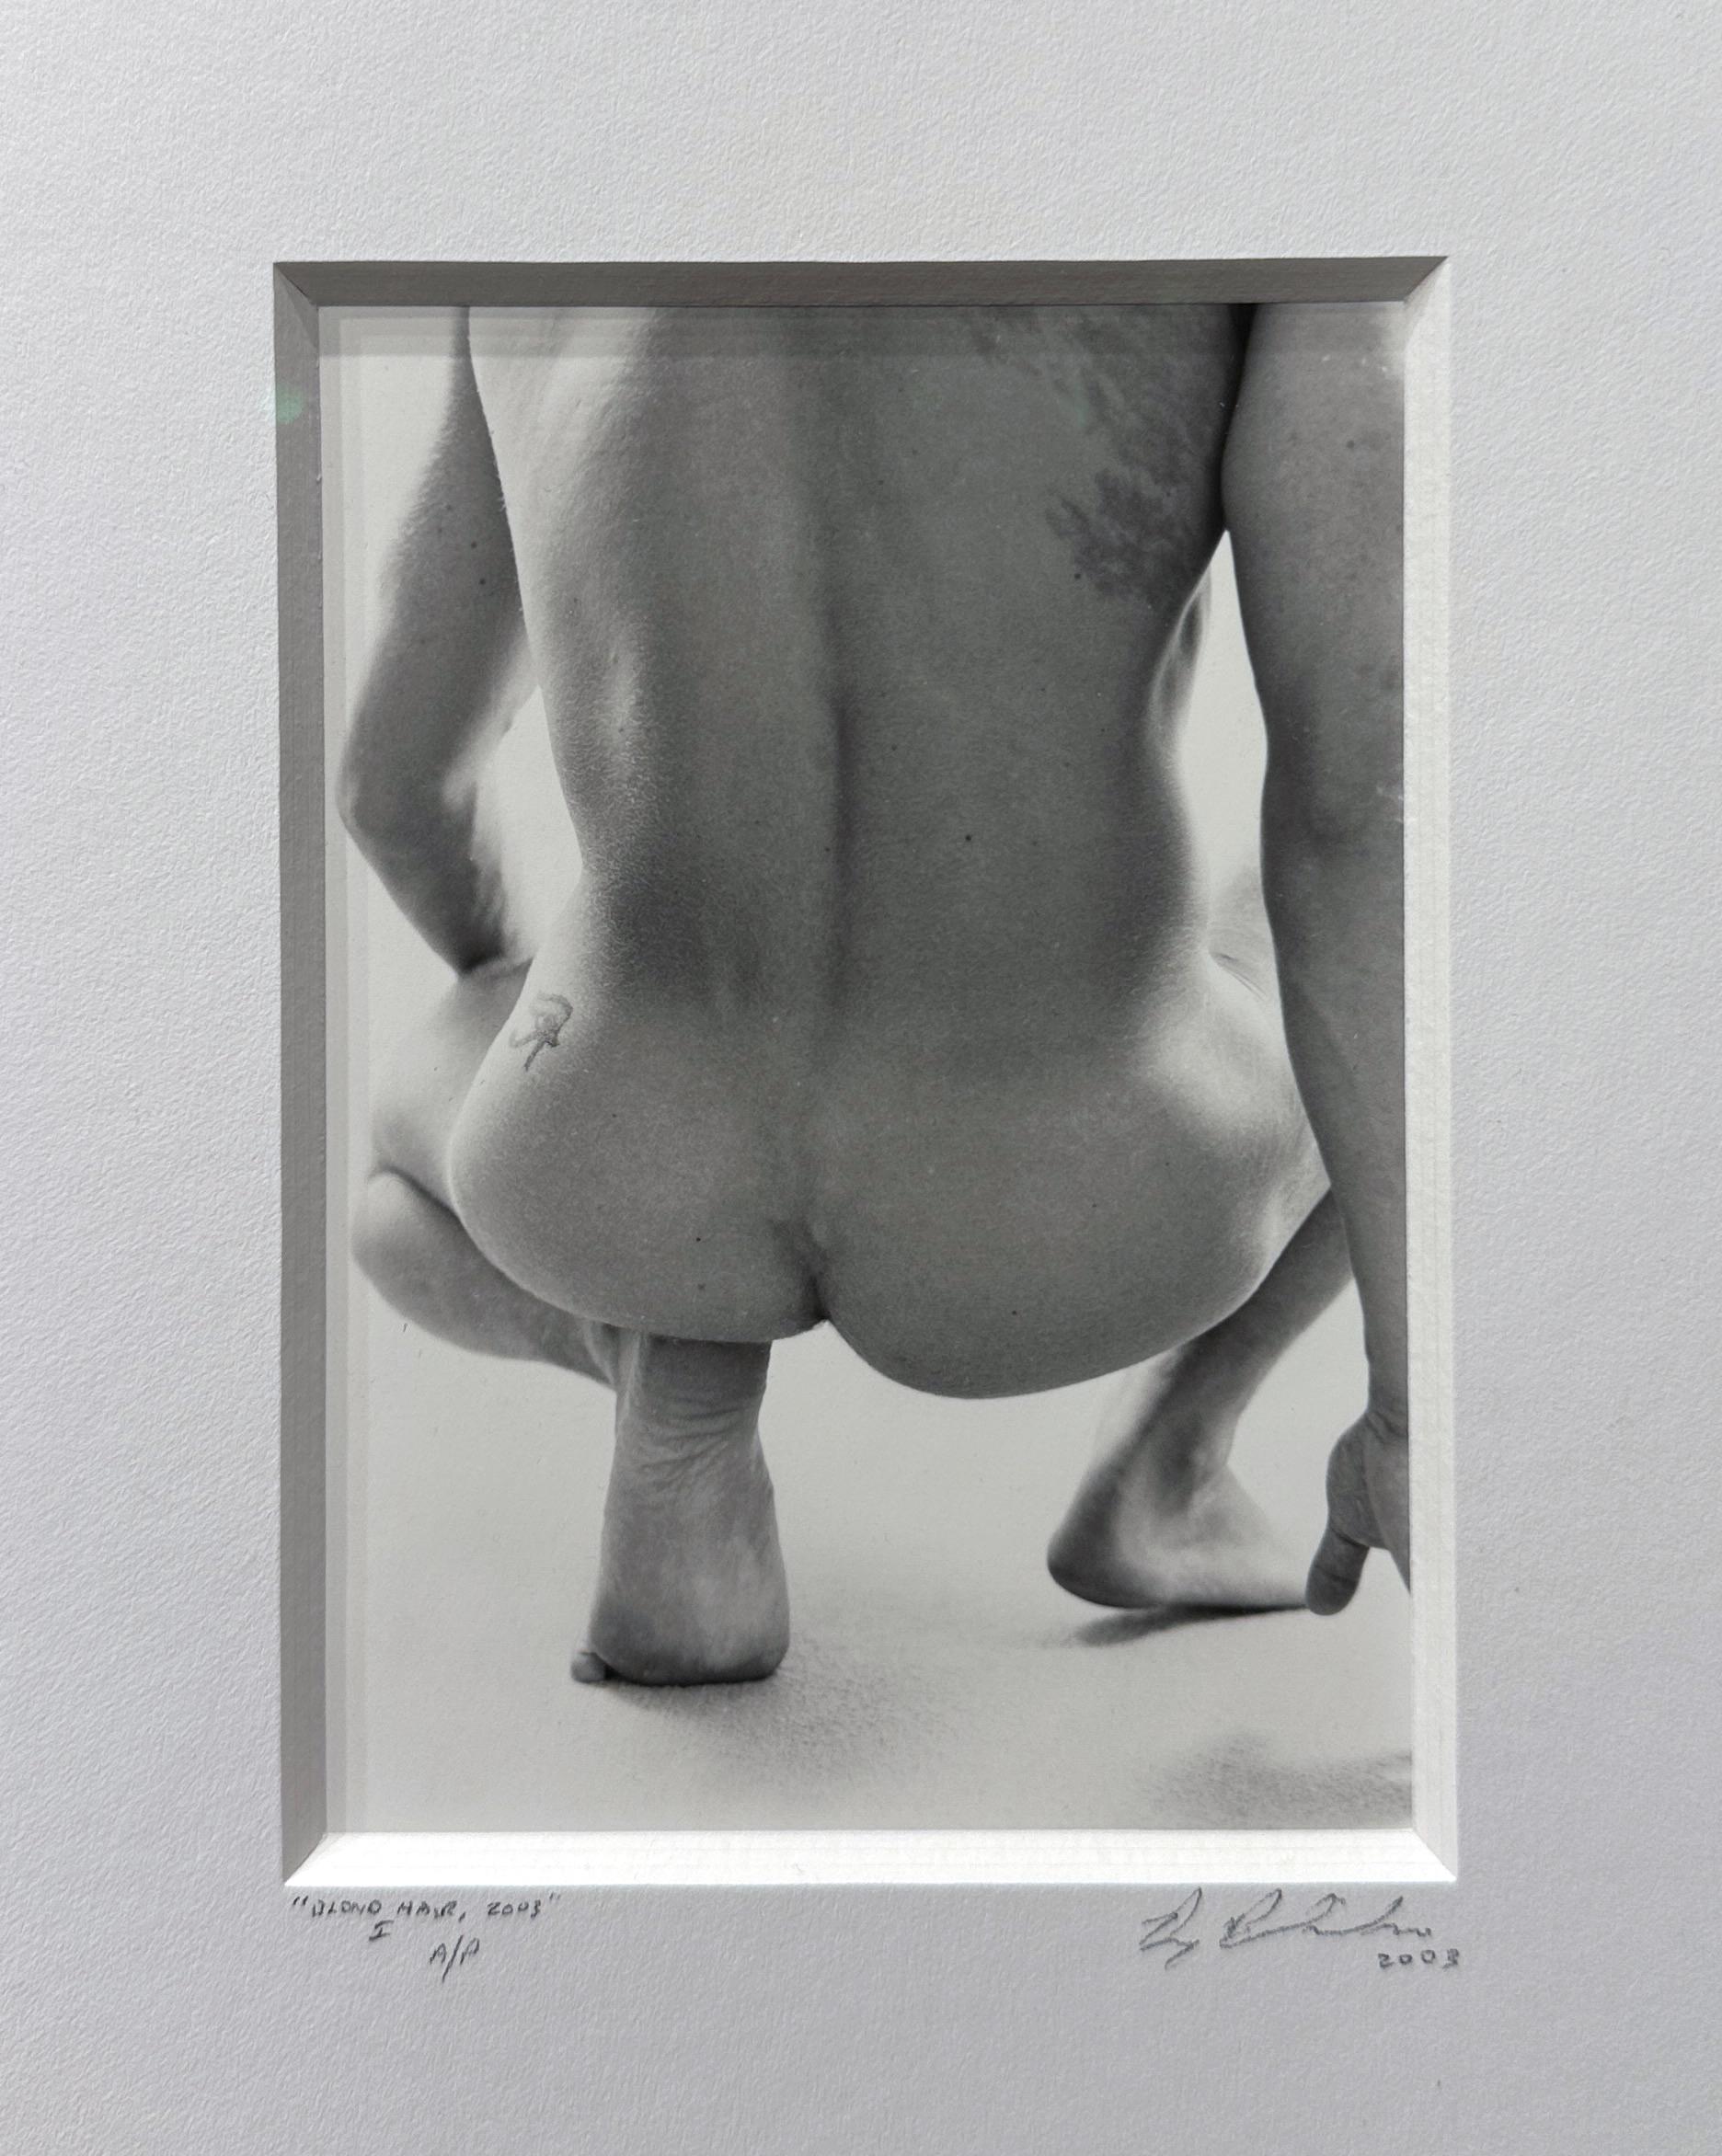 Blond Hair, Male Nude Torso, Black and White Photograph, Matted and Framed 4